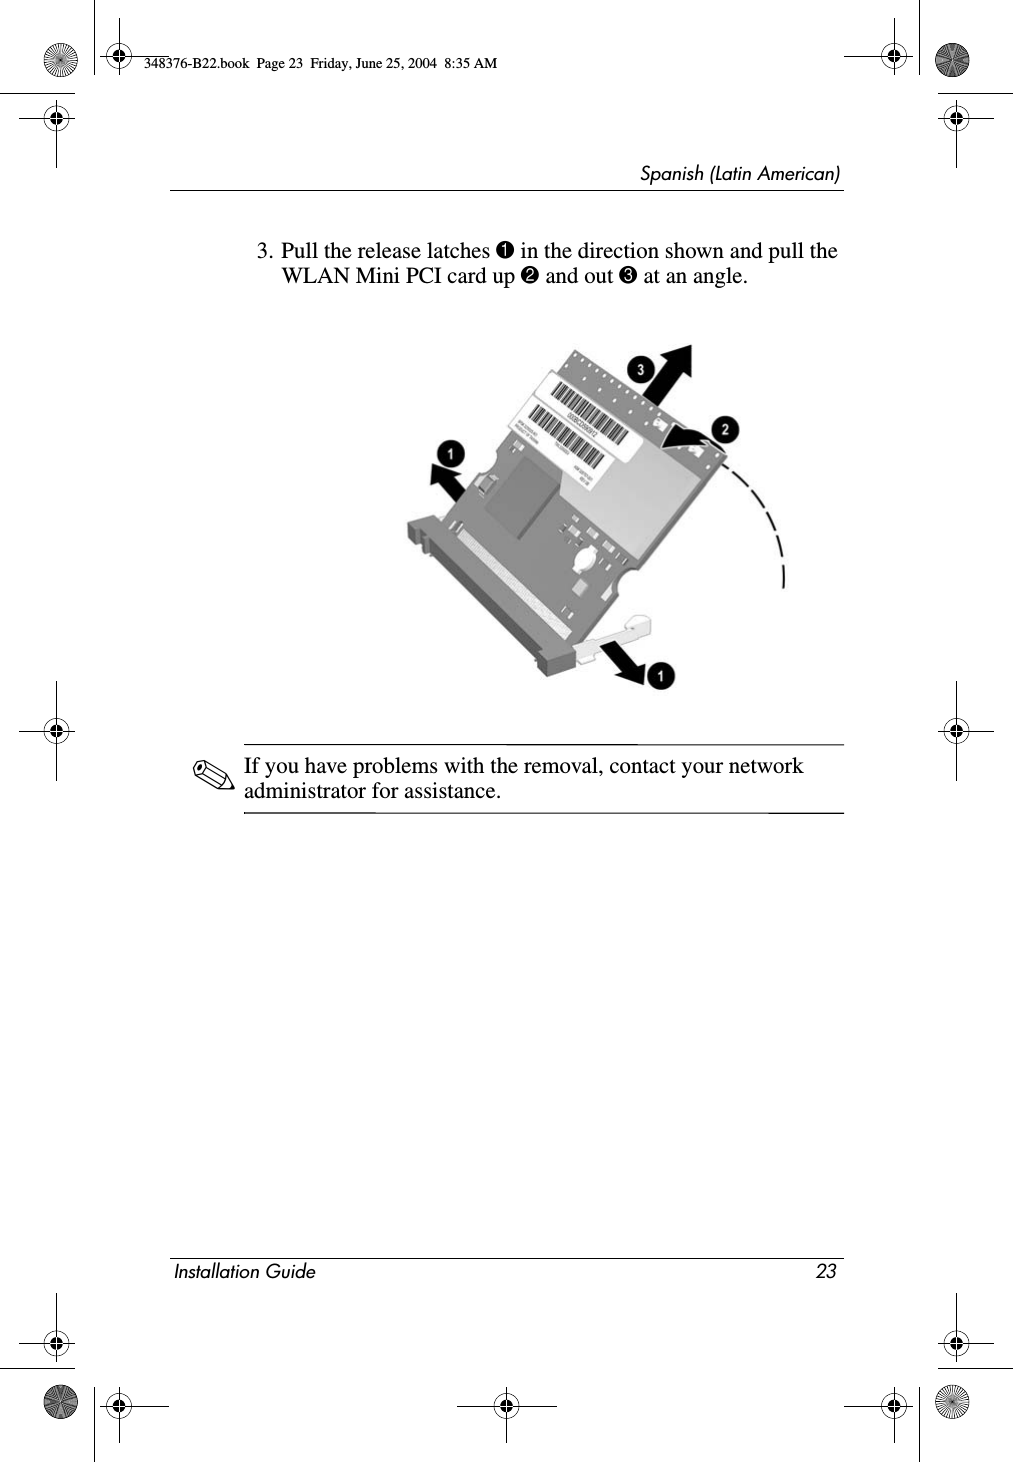 Spanish (Latin American)Installation Guide 233. Pull the release latches 1 in the direction shown and pull the WLAN Mini PCI card up 2 and out 3 at an angle.✎If you have problems with the removal, contact your network administrator for assistance.348376-B22.book  Page 23  Friday, June 25, 2004  8:35 AM